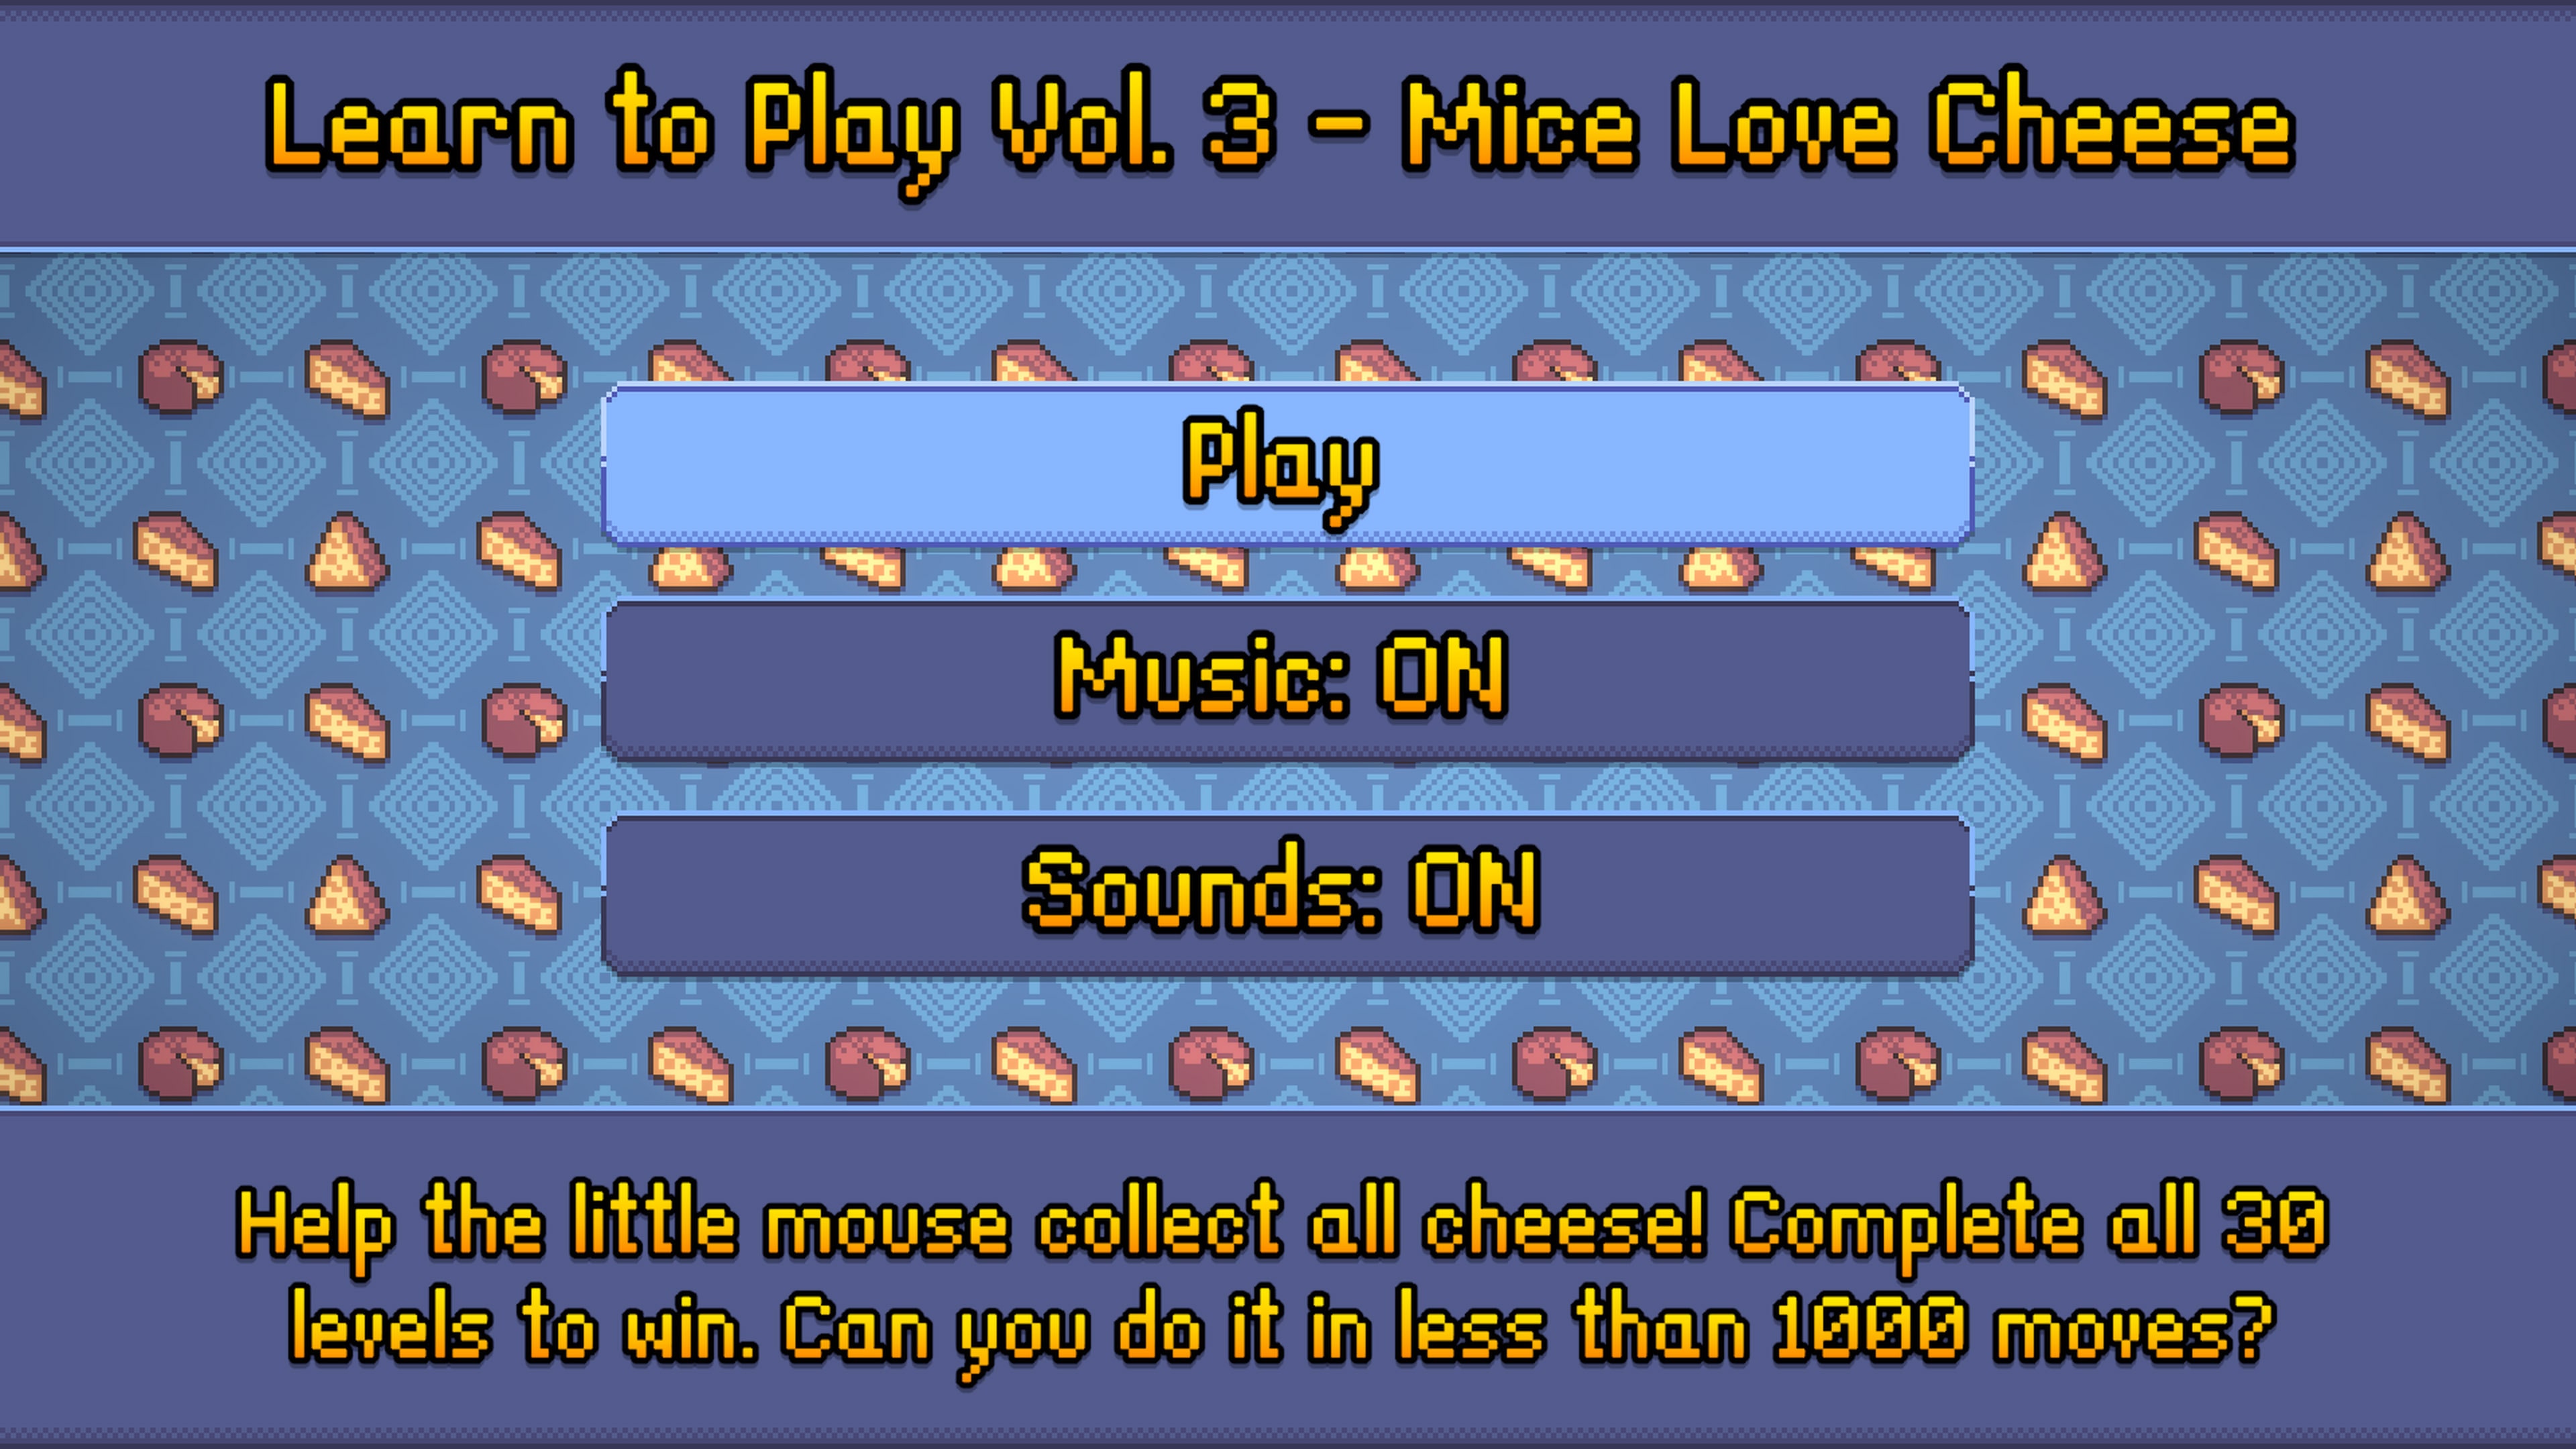 #2. Learn to Play Vol. 3 - Mice Love Cheese (PlayStation) By: EastAsiaSoft